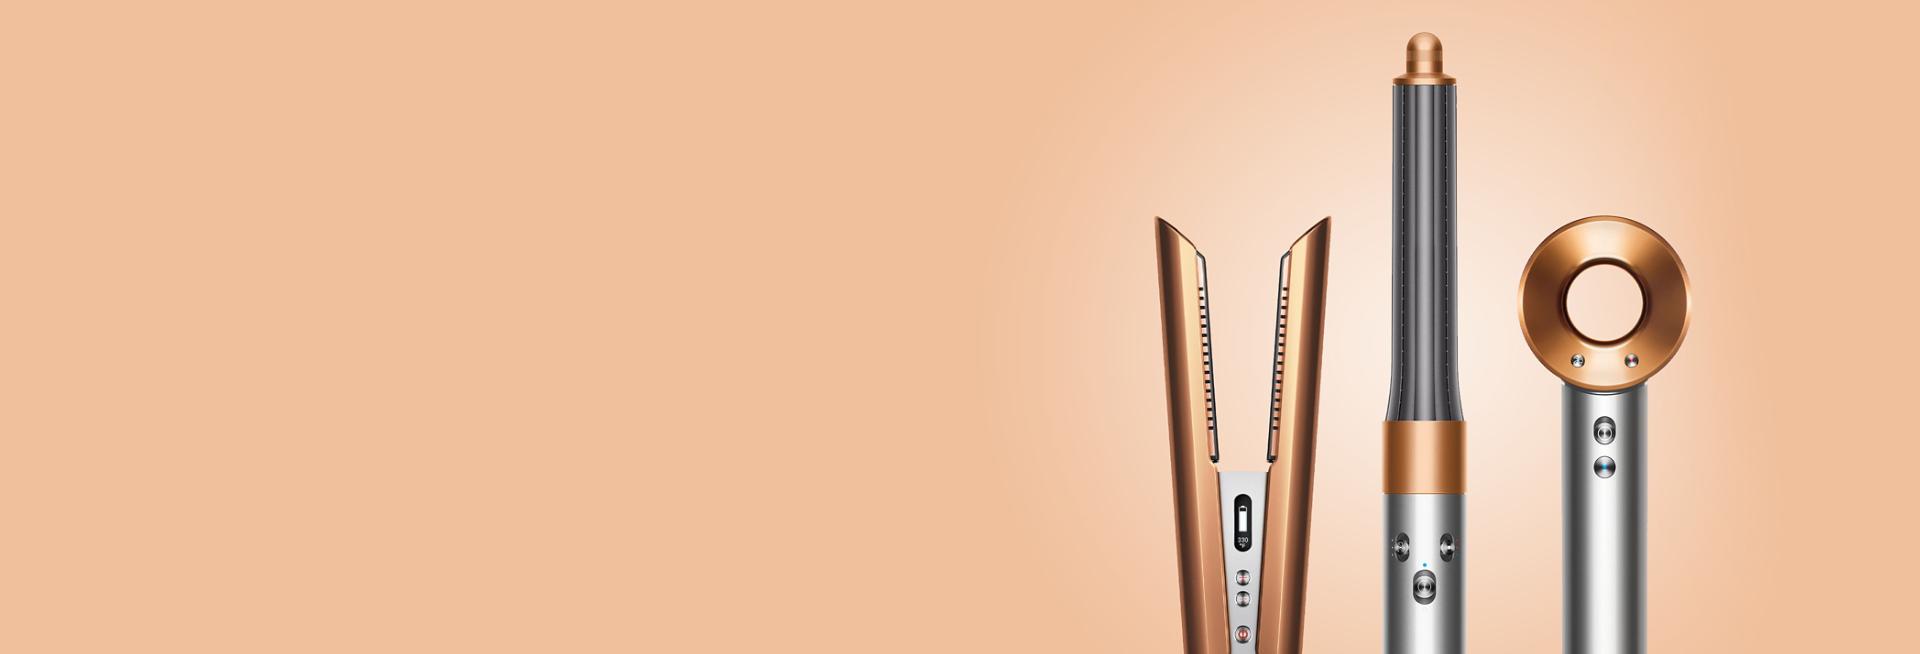 The Dyson hair care range in nickel copper on a peach background